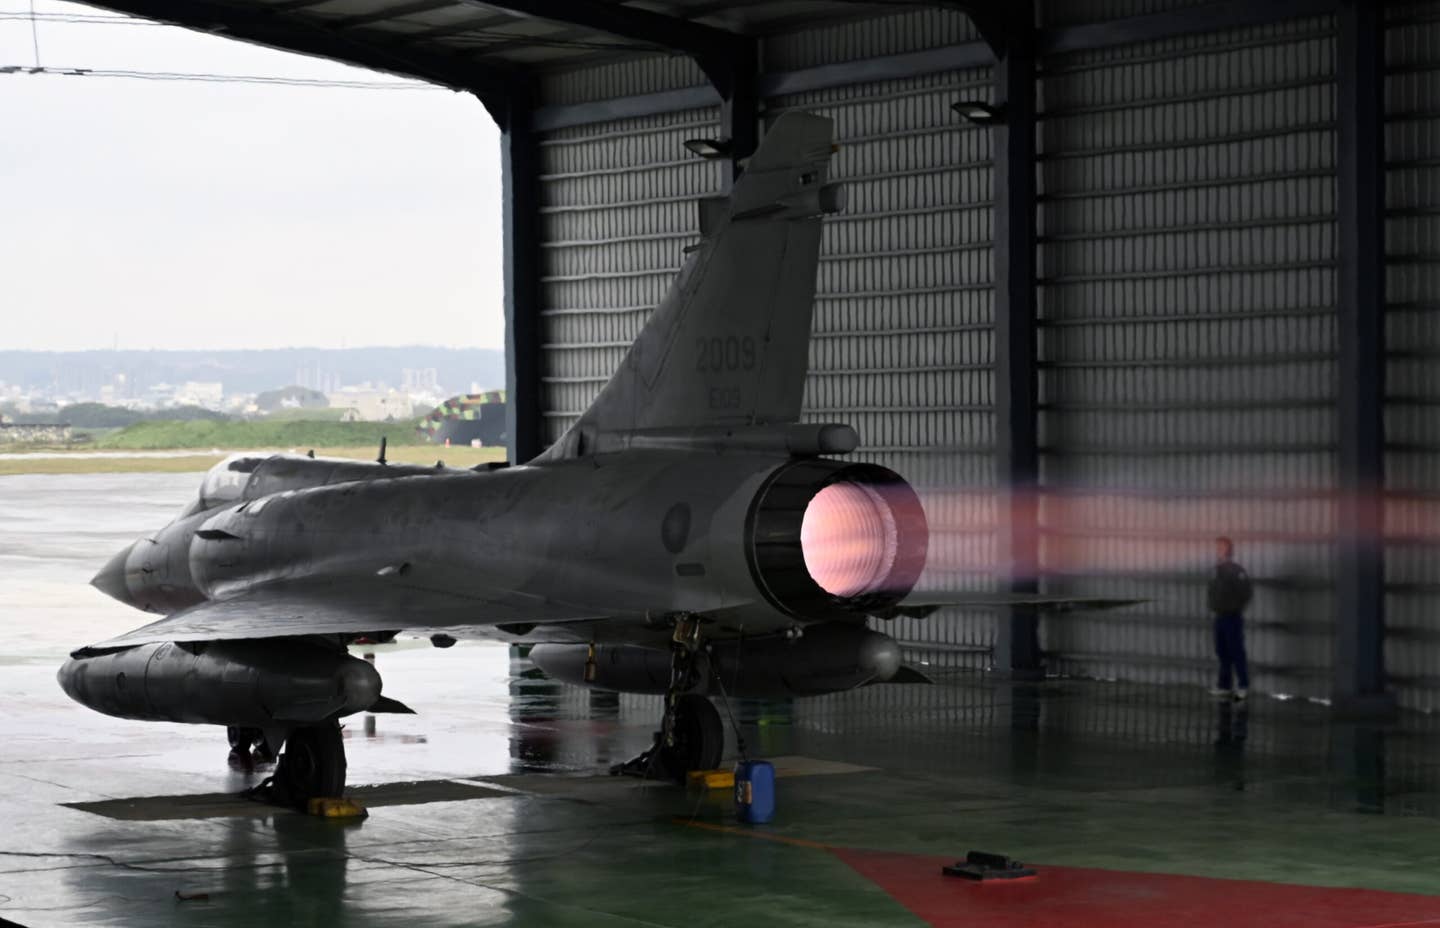 A ROCAF technician stands next to a Mirage 2000-5 jet in a hangar during a full-power engine test during an annual exercise at Hsinchu Air Base on January 16, 2019. <em>SAM YEH/AFP via Getty Images</em>